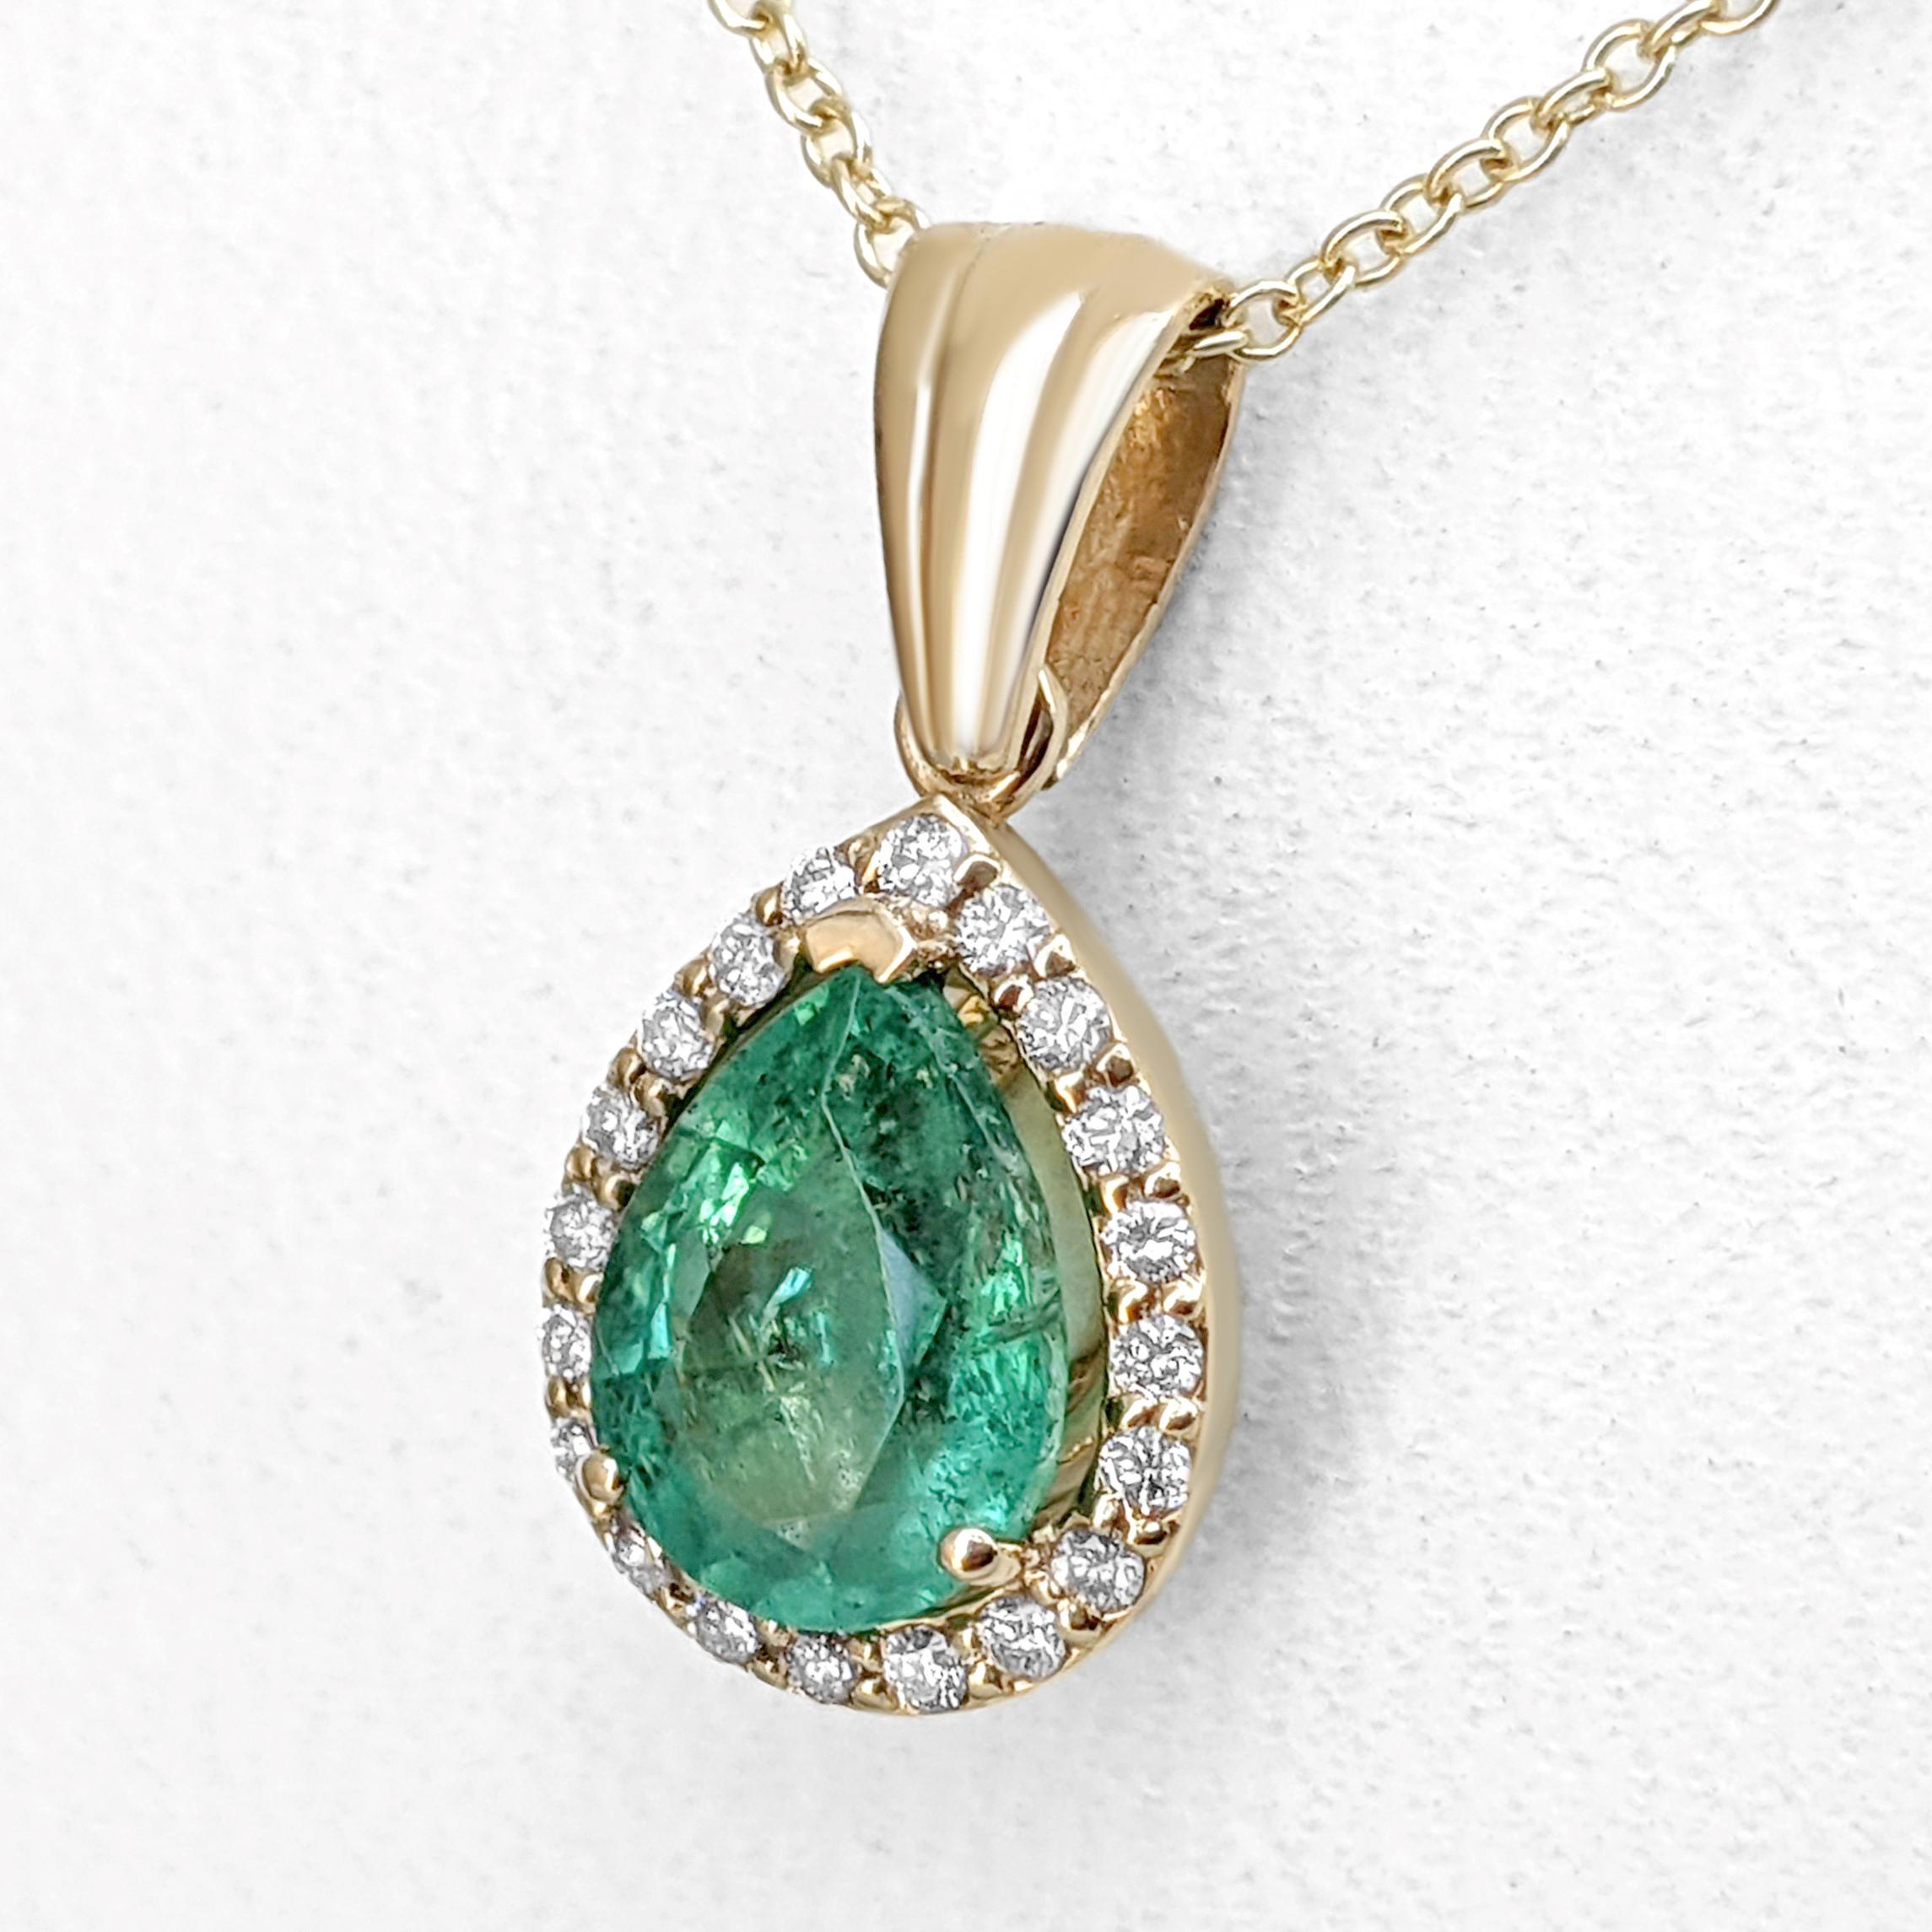 Pear Cut $1 NO RESERVE!  1.16ct Emerald & 0.15ct Diamonds, 14K Yellow Gold Necklace